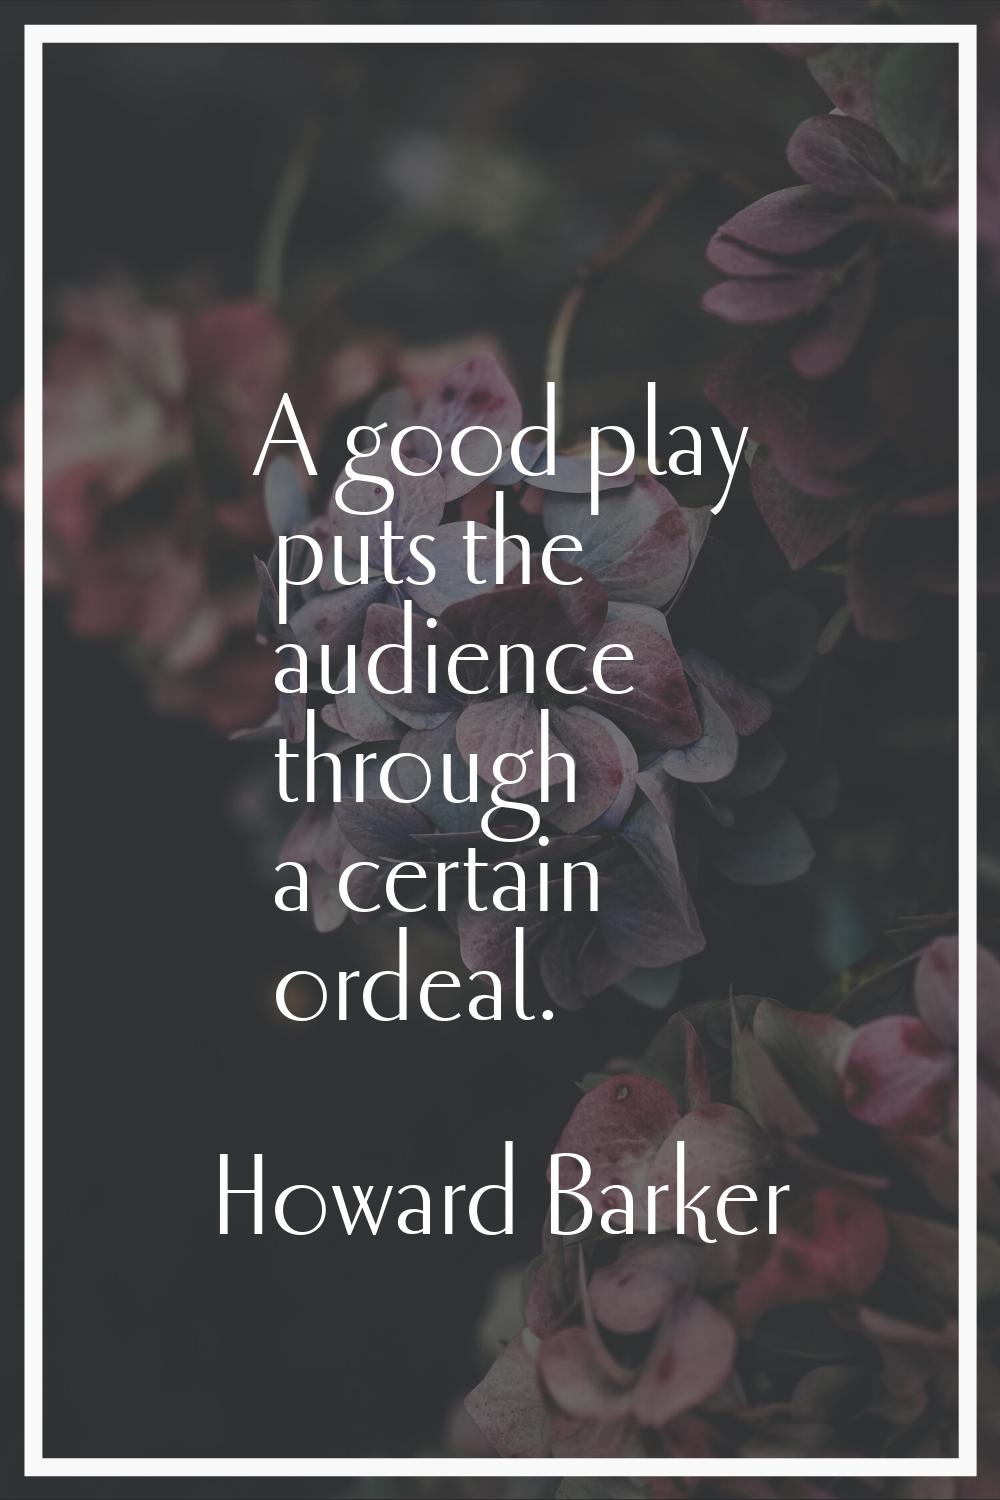 A good play puts the audience through a certain ordeal.